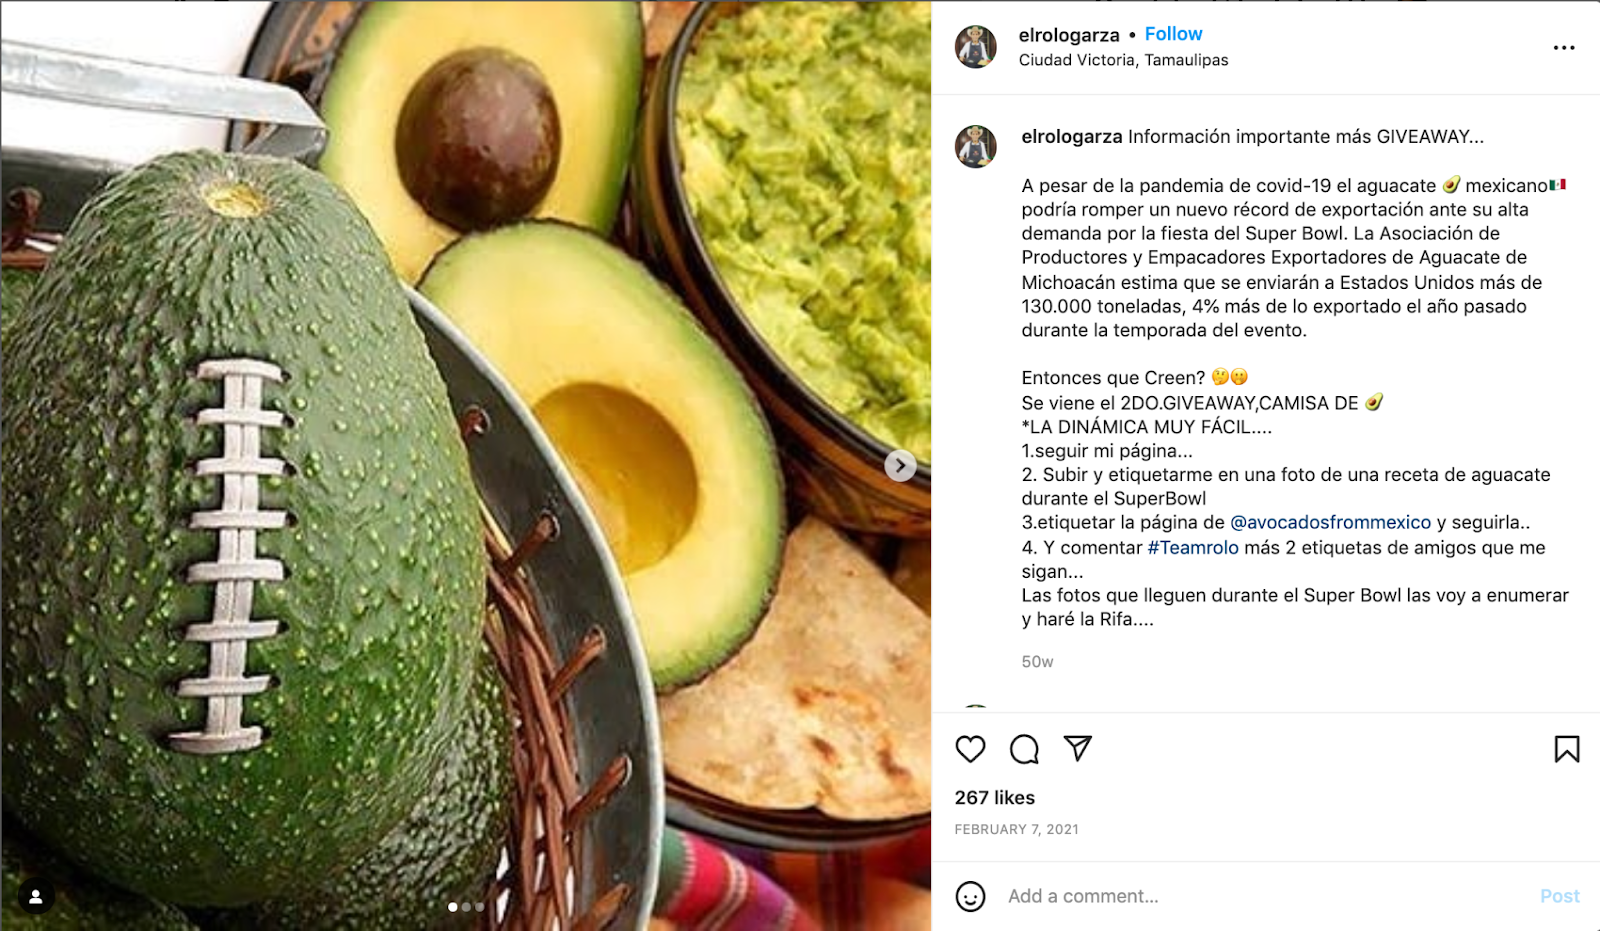 Screenshot of Instagram post featuring an avocado with stitching like a football next to a bowl of guacamole 